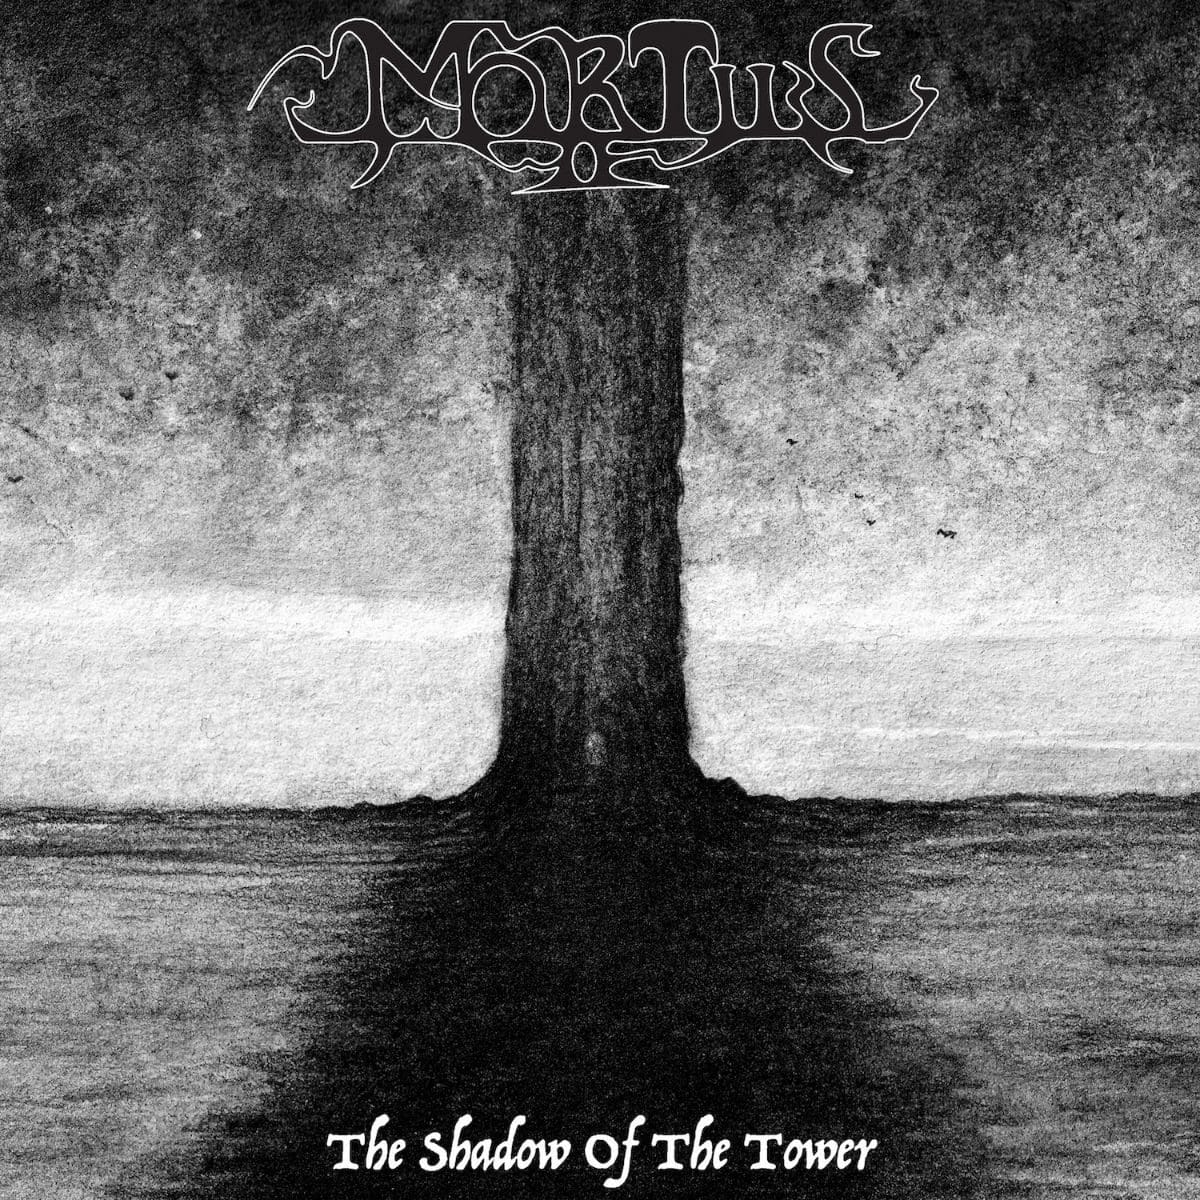 Lost 1997 Mortiis recording gets released after all